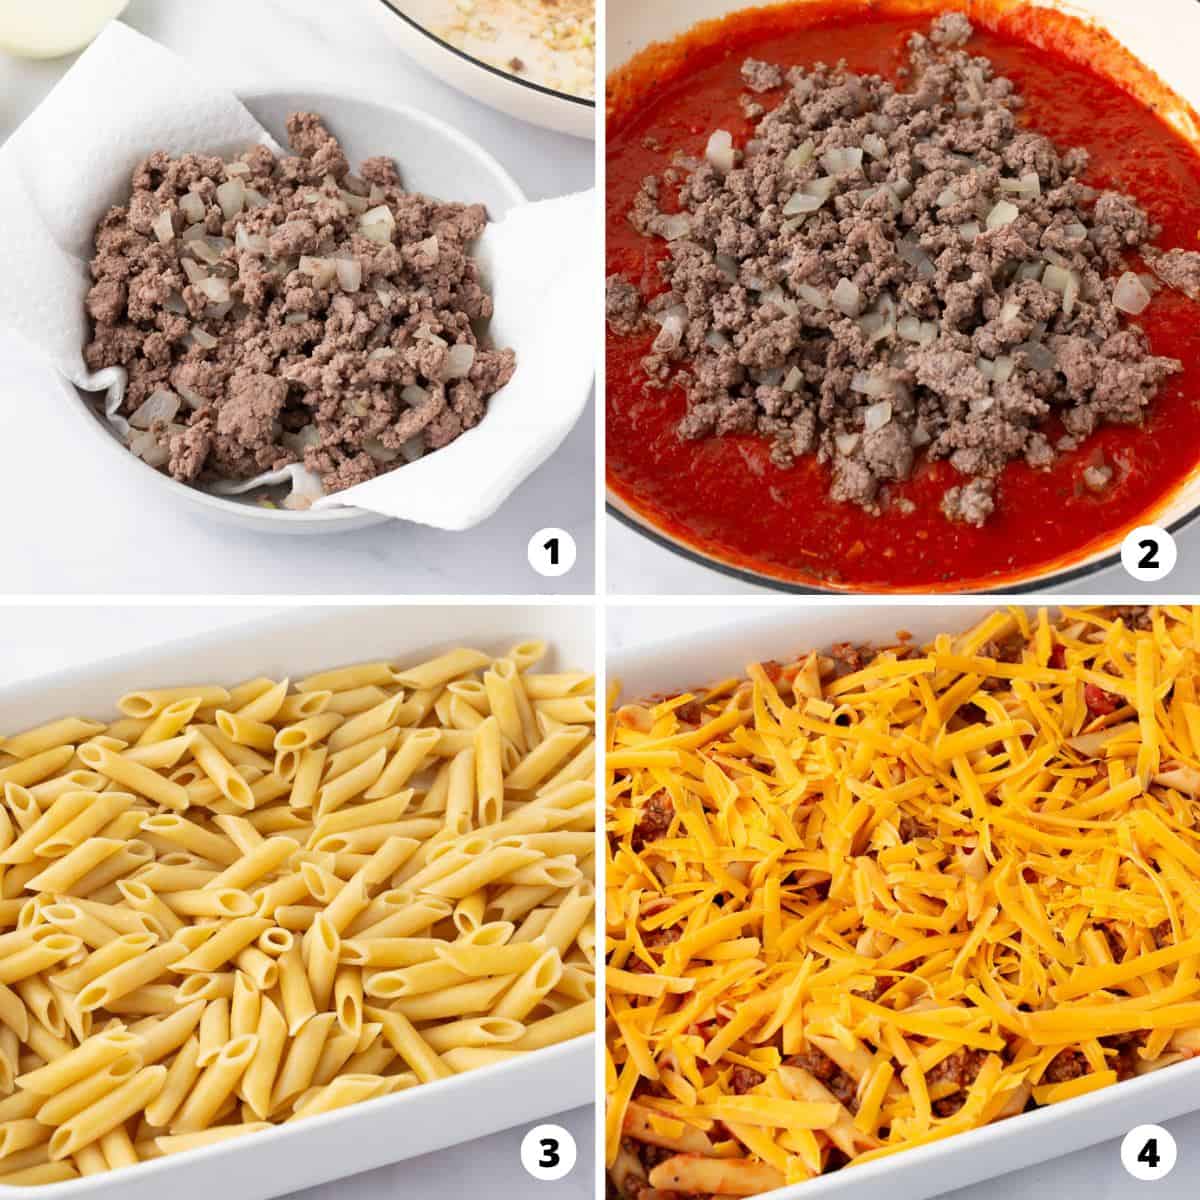 Showing how to make ground beef casserole in a 4 step collage.